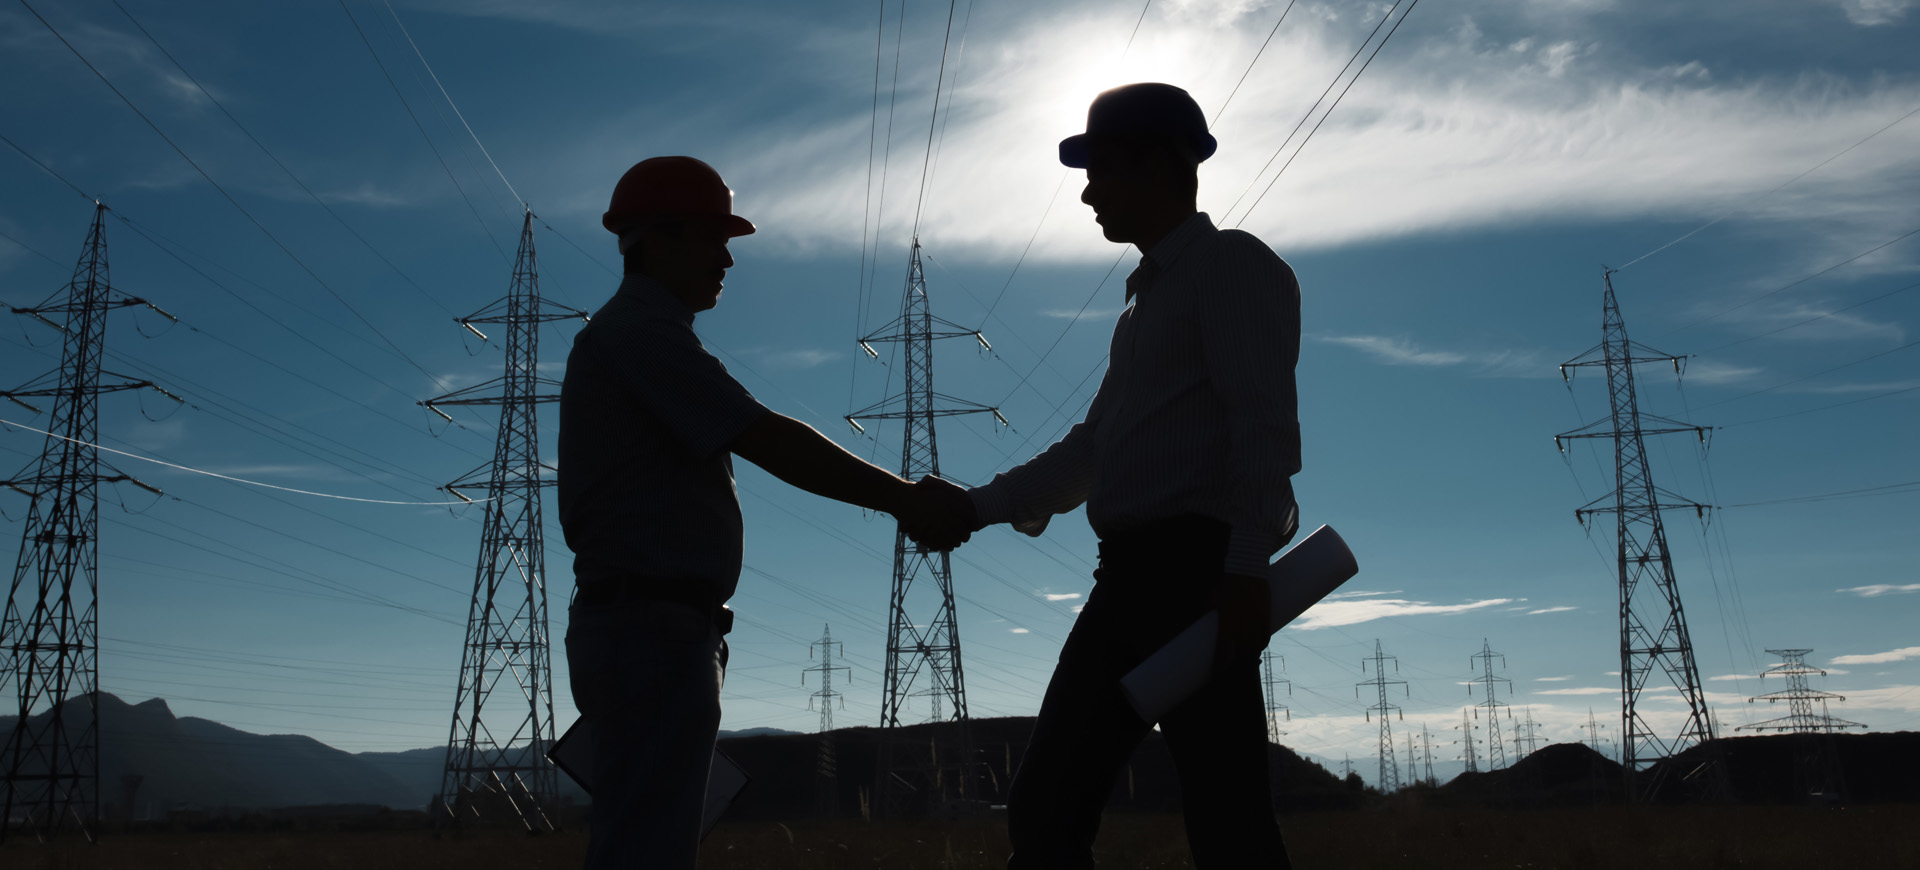 Silhouette of Engineers Shaking Hands in front of High Voltage Power Lines